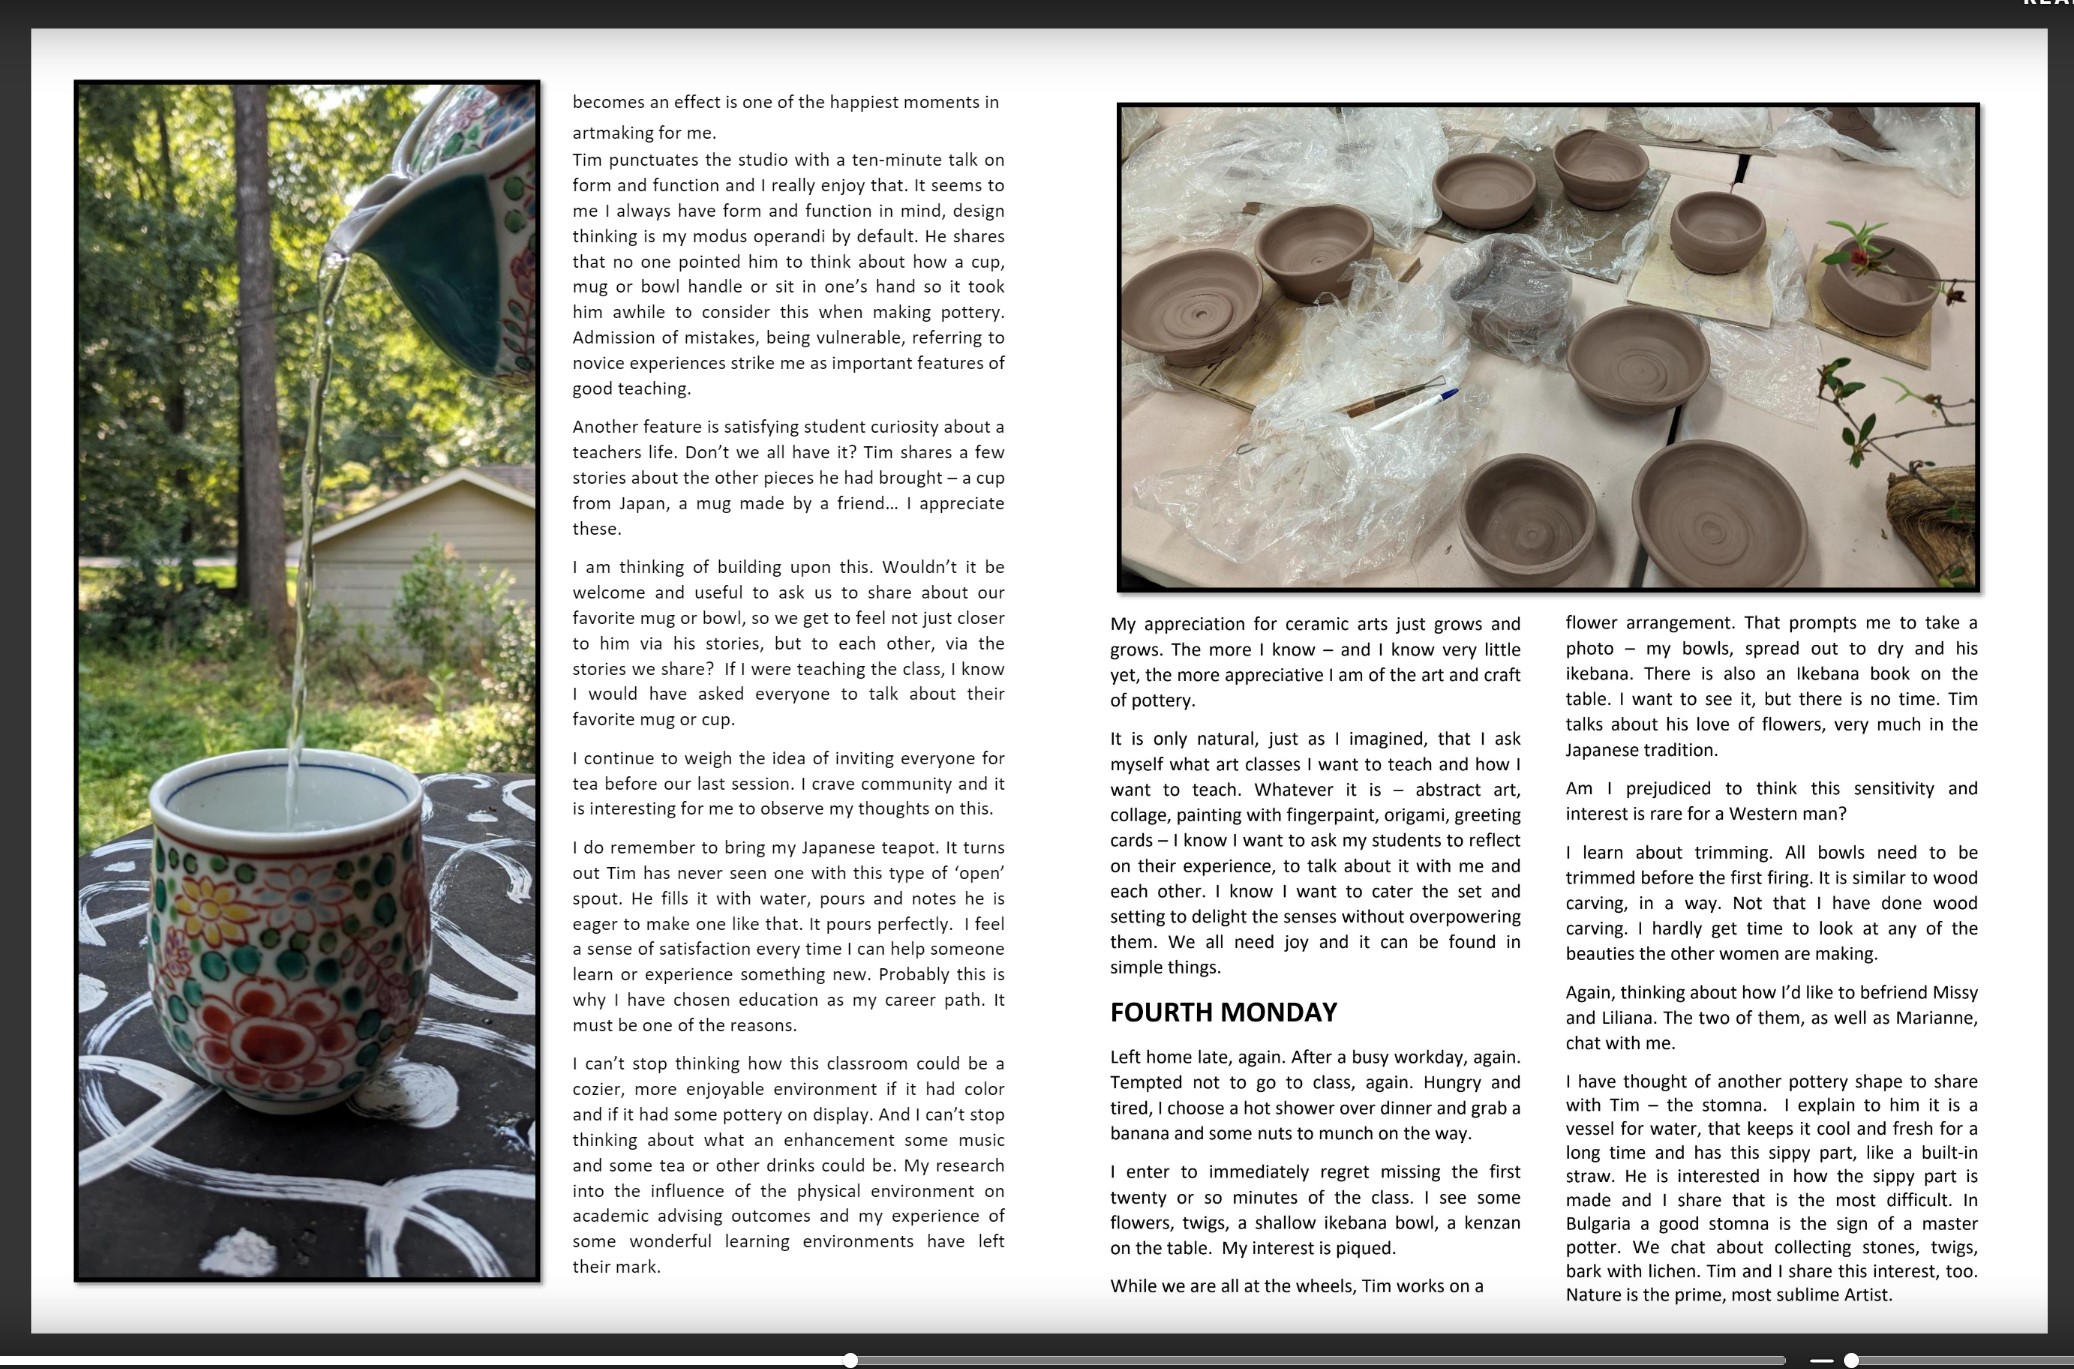 Diary of an Adult Pottery Adventure / Screenshot of pages 6 and 7 from "Diary of an Adult Pottery Adventure", an autoethnographic a/r/tography project, available to view at https://issuu.com/home/published/diary_of_an_adult_pottery_adventure_by_anna_trayko